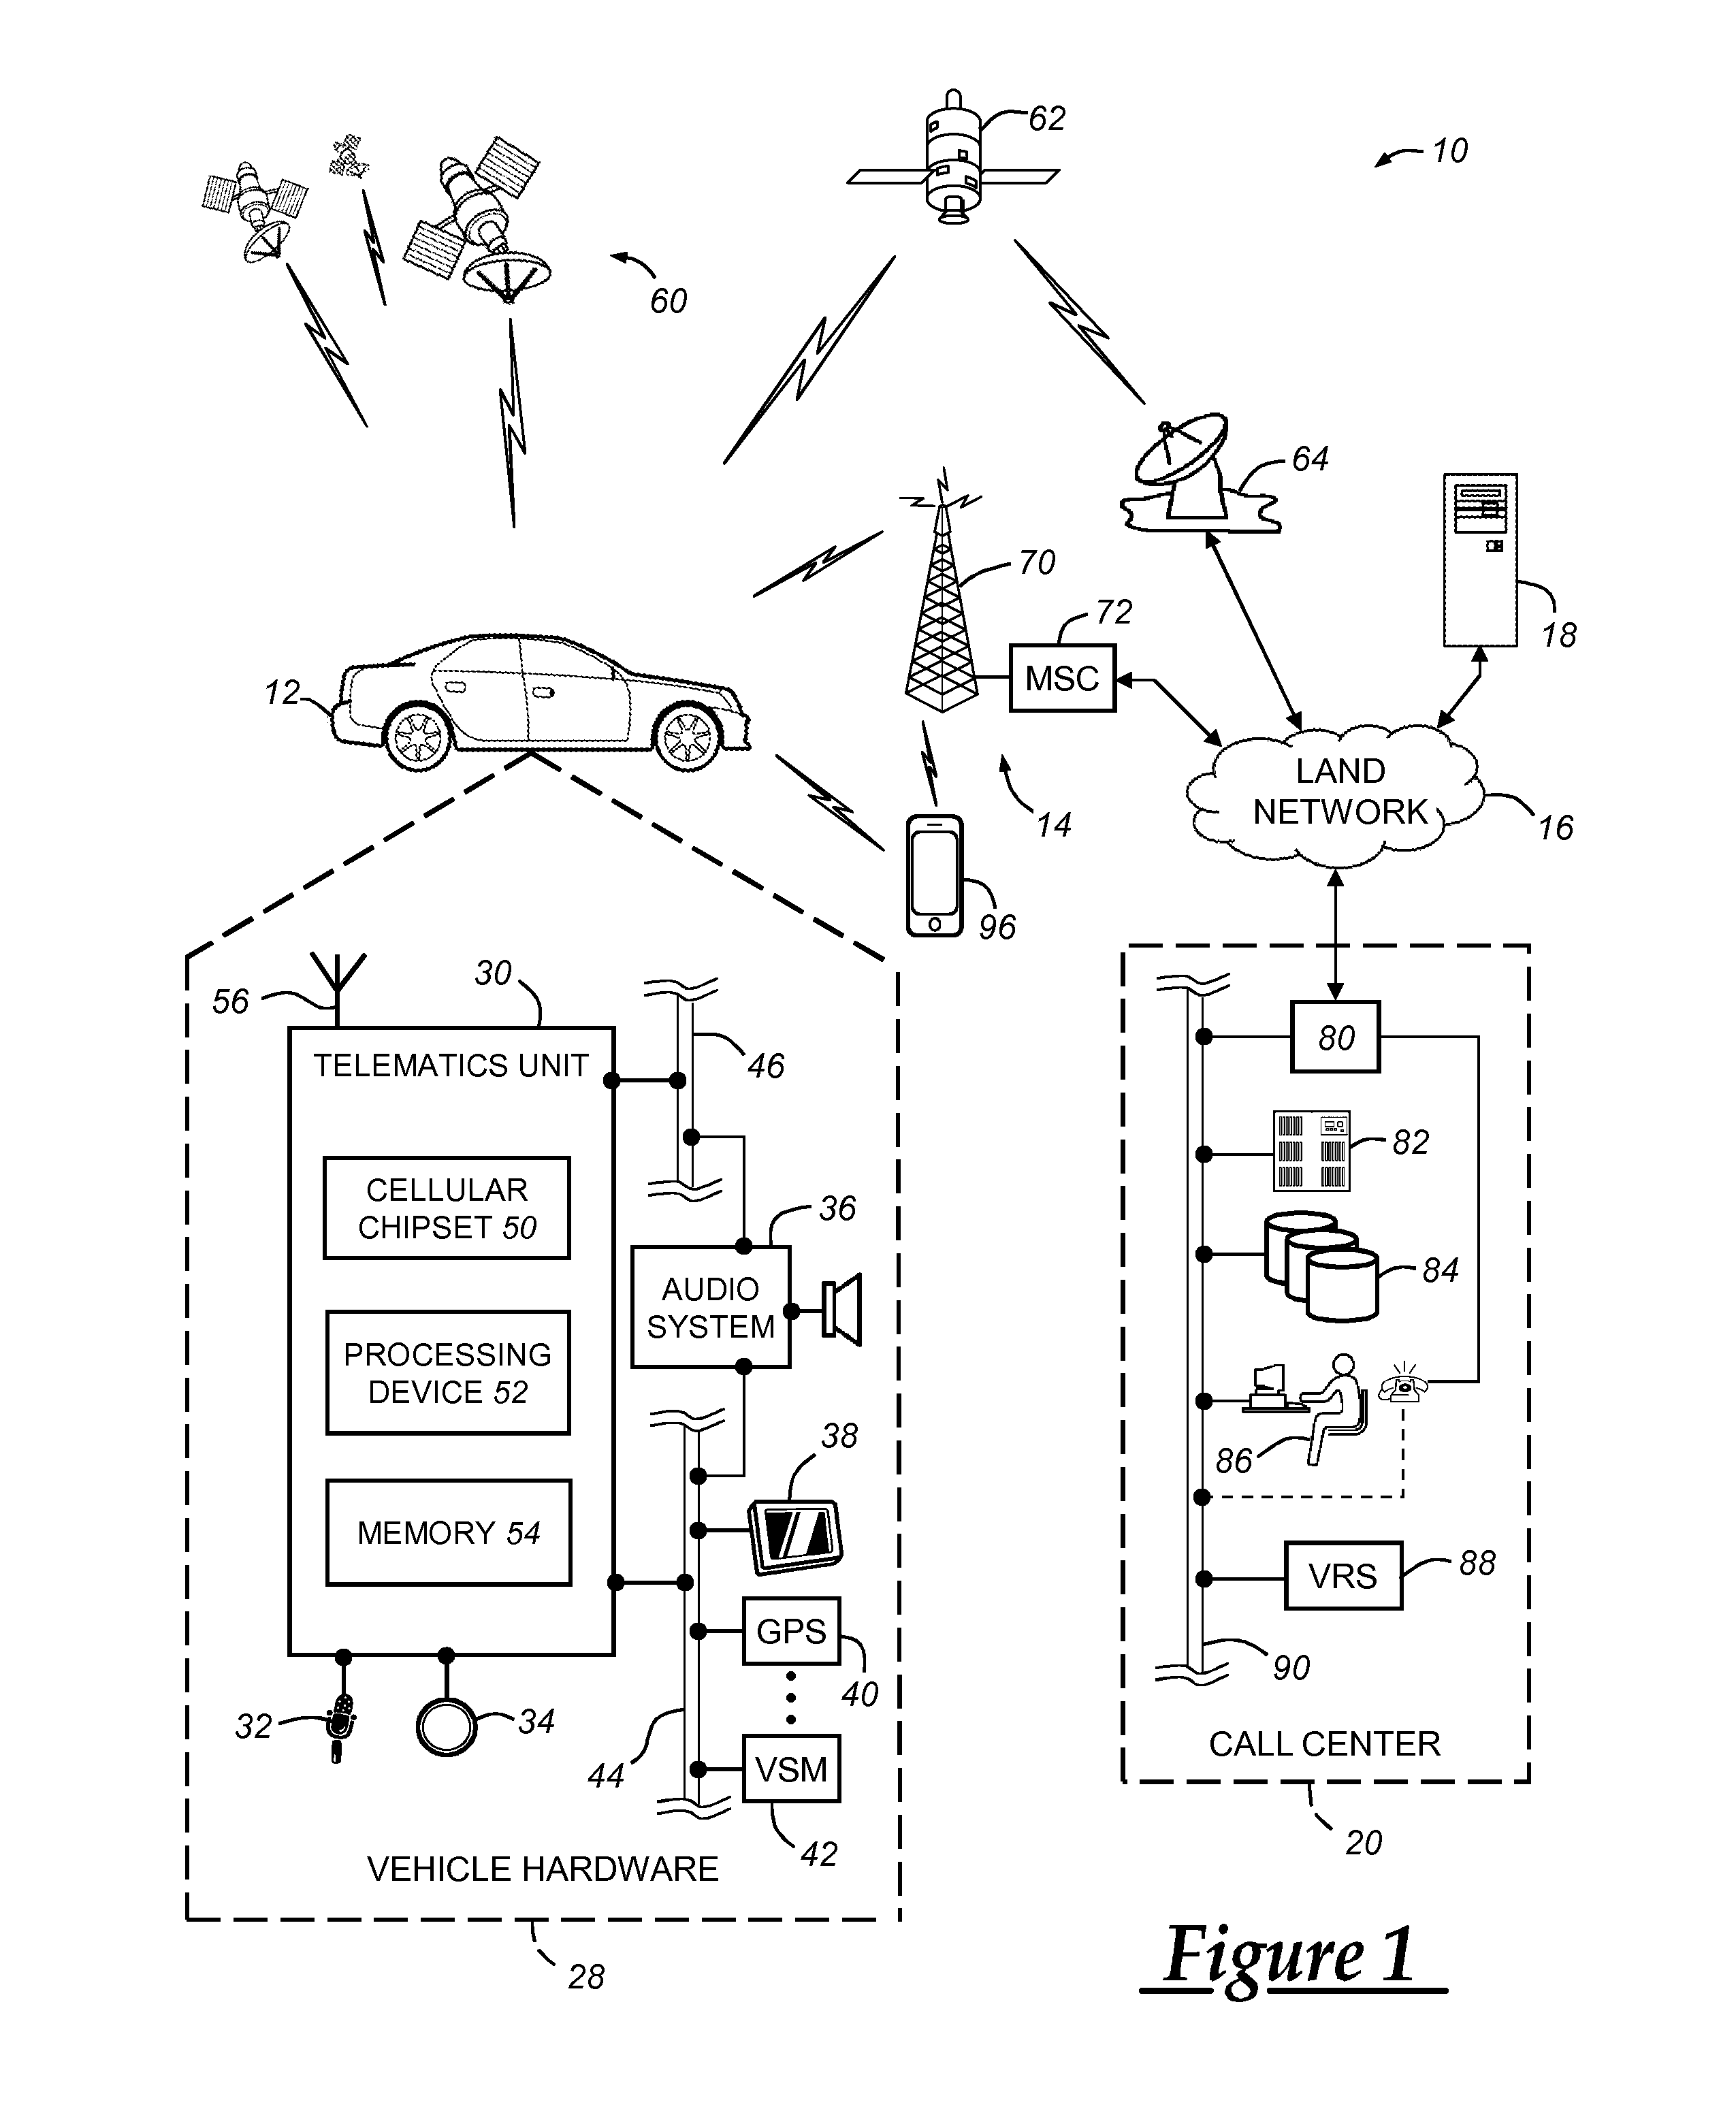 Fully authenticated content transmission from a provider to a recipient device via an intermediary device